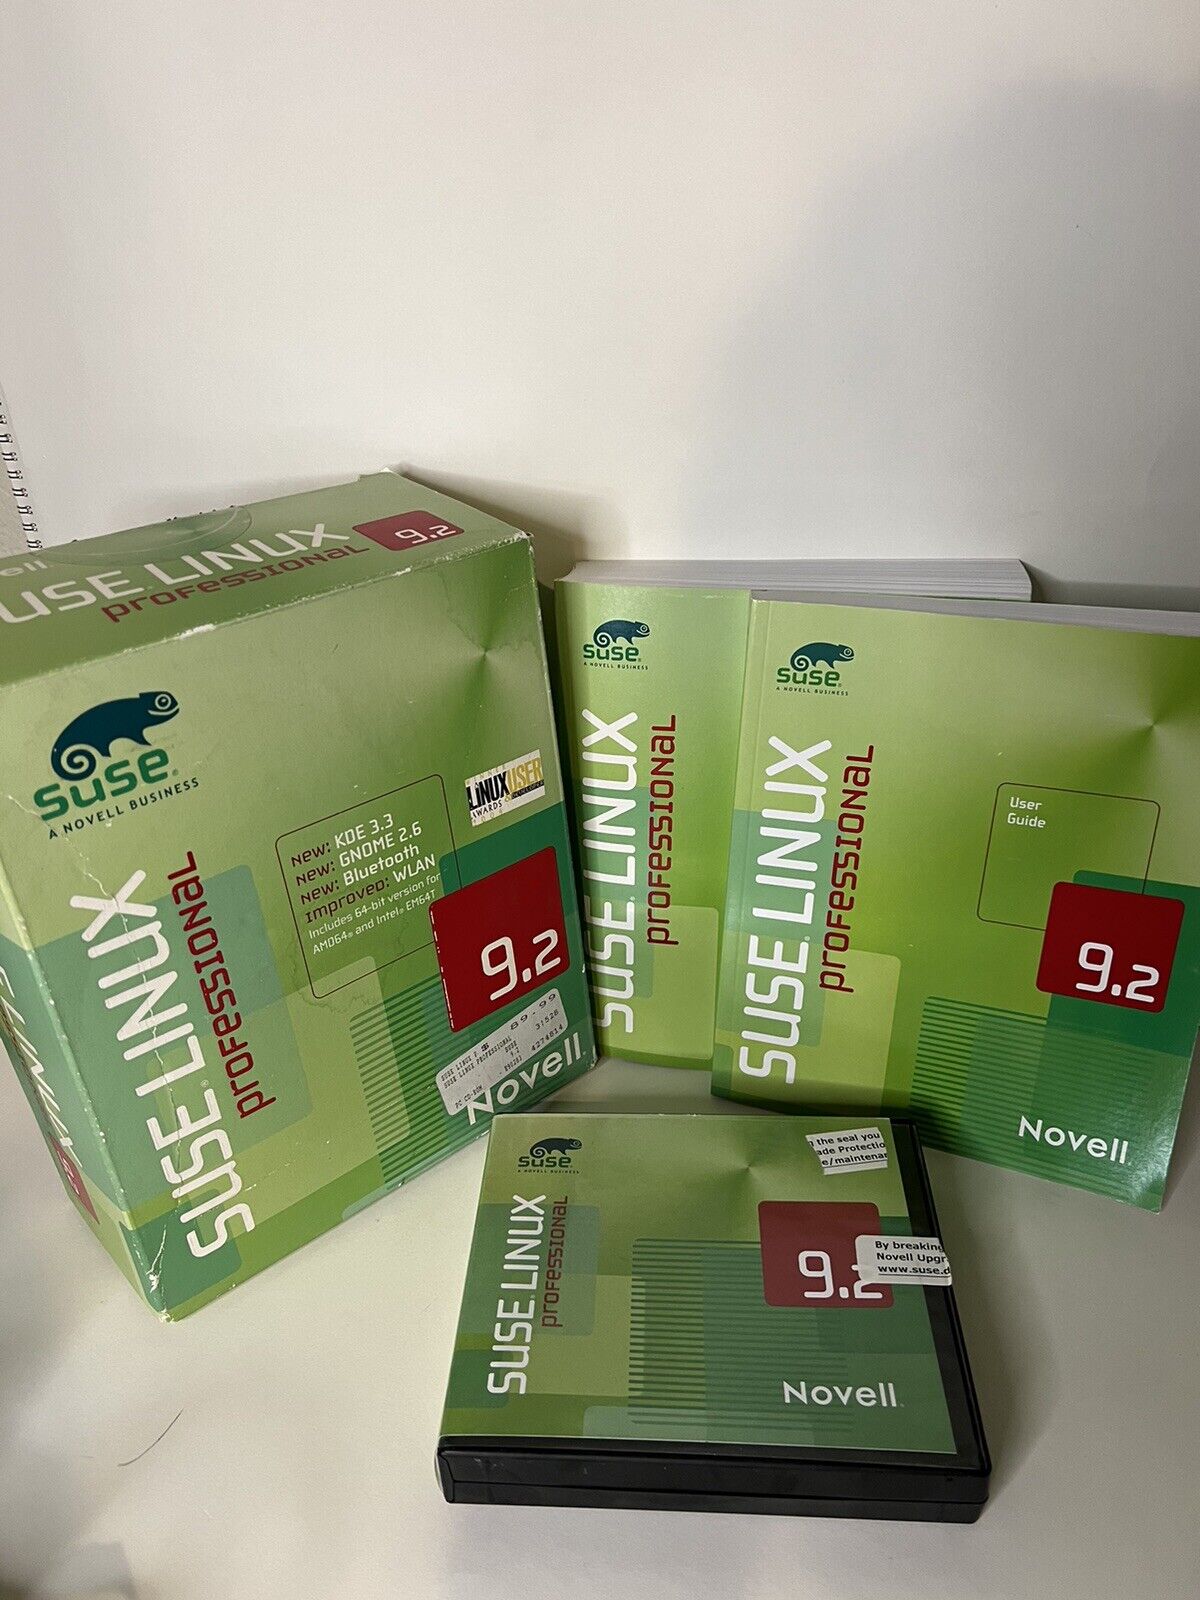 Novell SUSE LINUX Professional 9.2 Operating System Software Big Box. COMPLETE